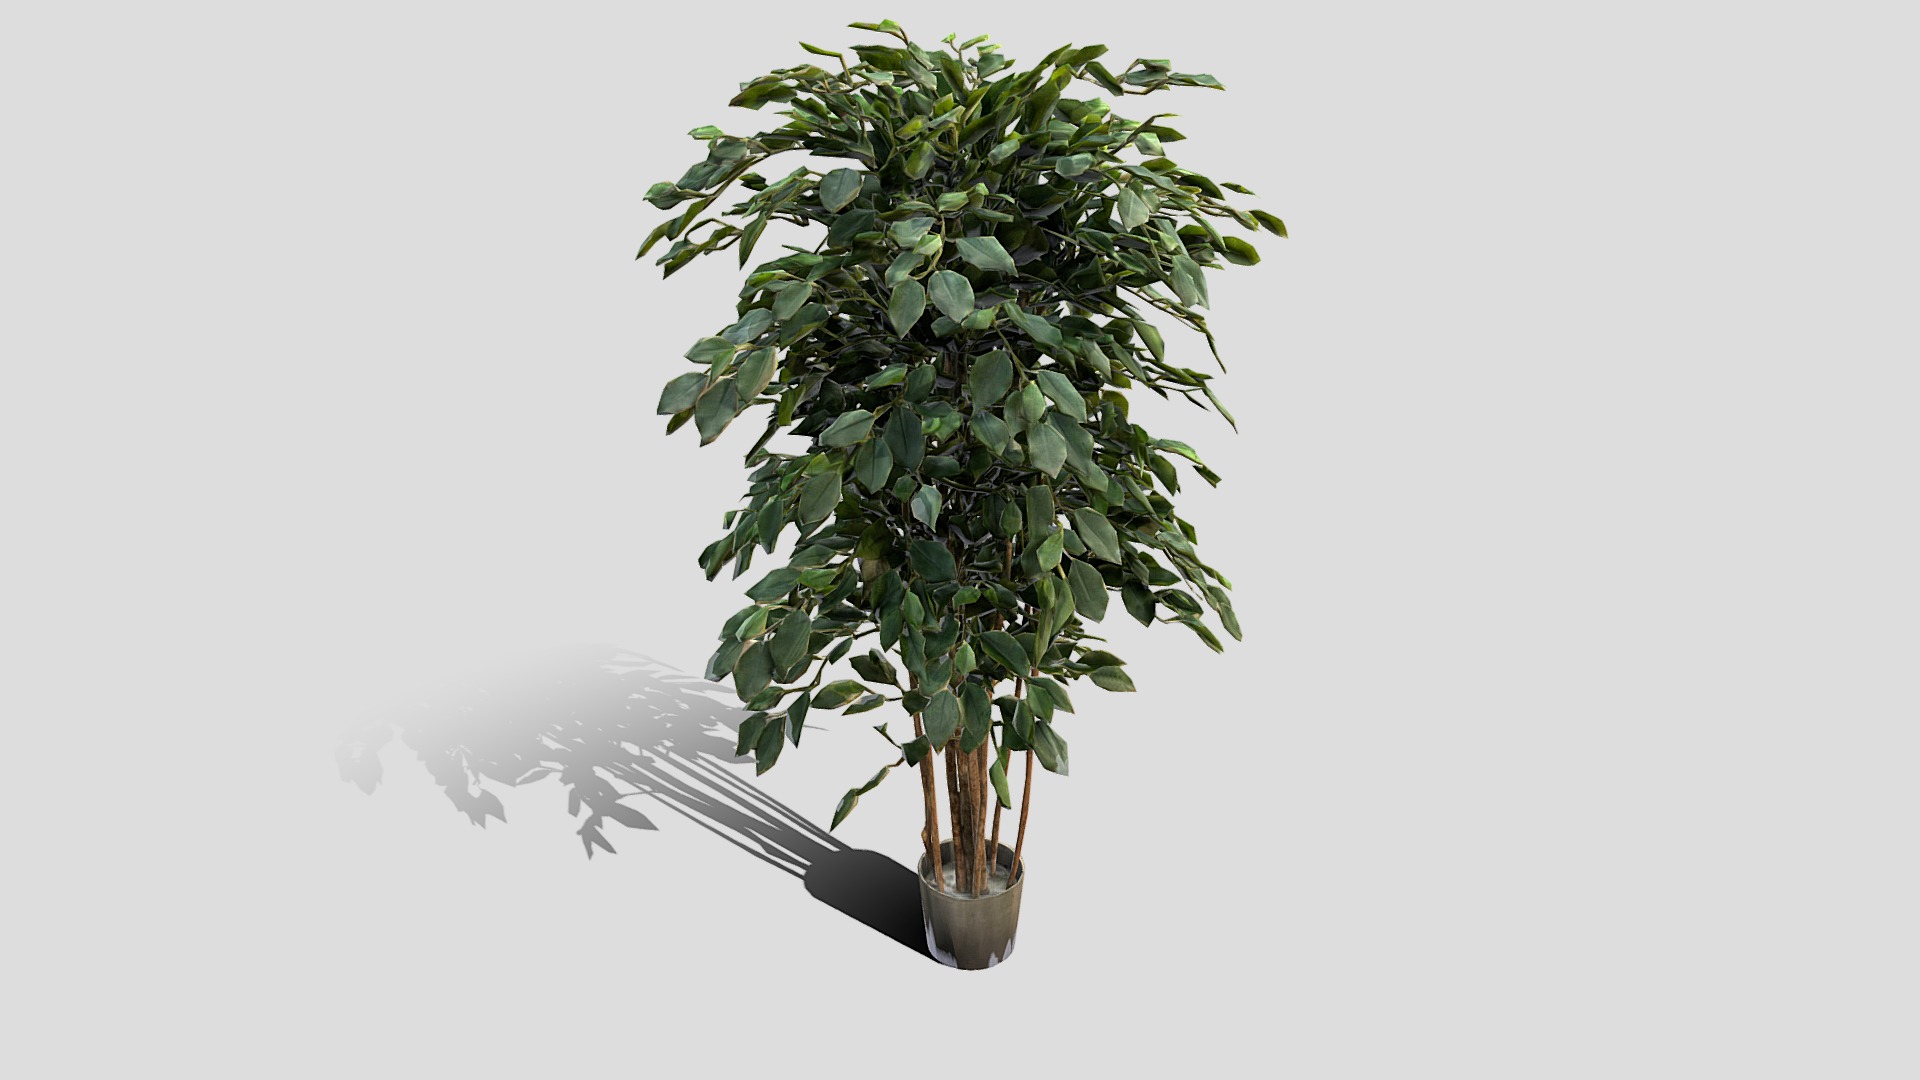 3D model 000105_112315 - This is a 3D model of the 000105_112315. The 3D model is about a tree with a knife.